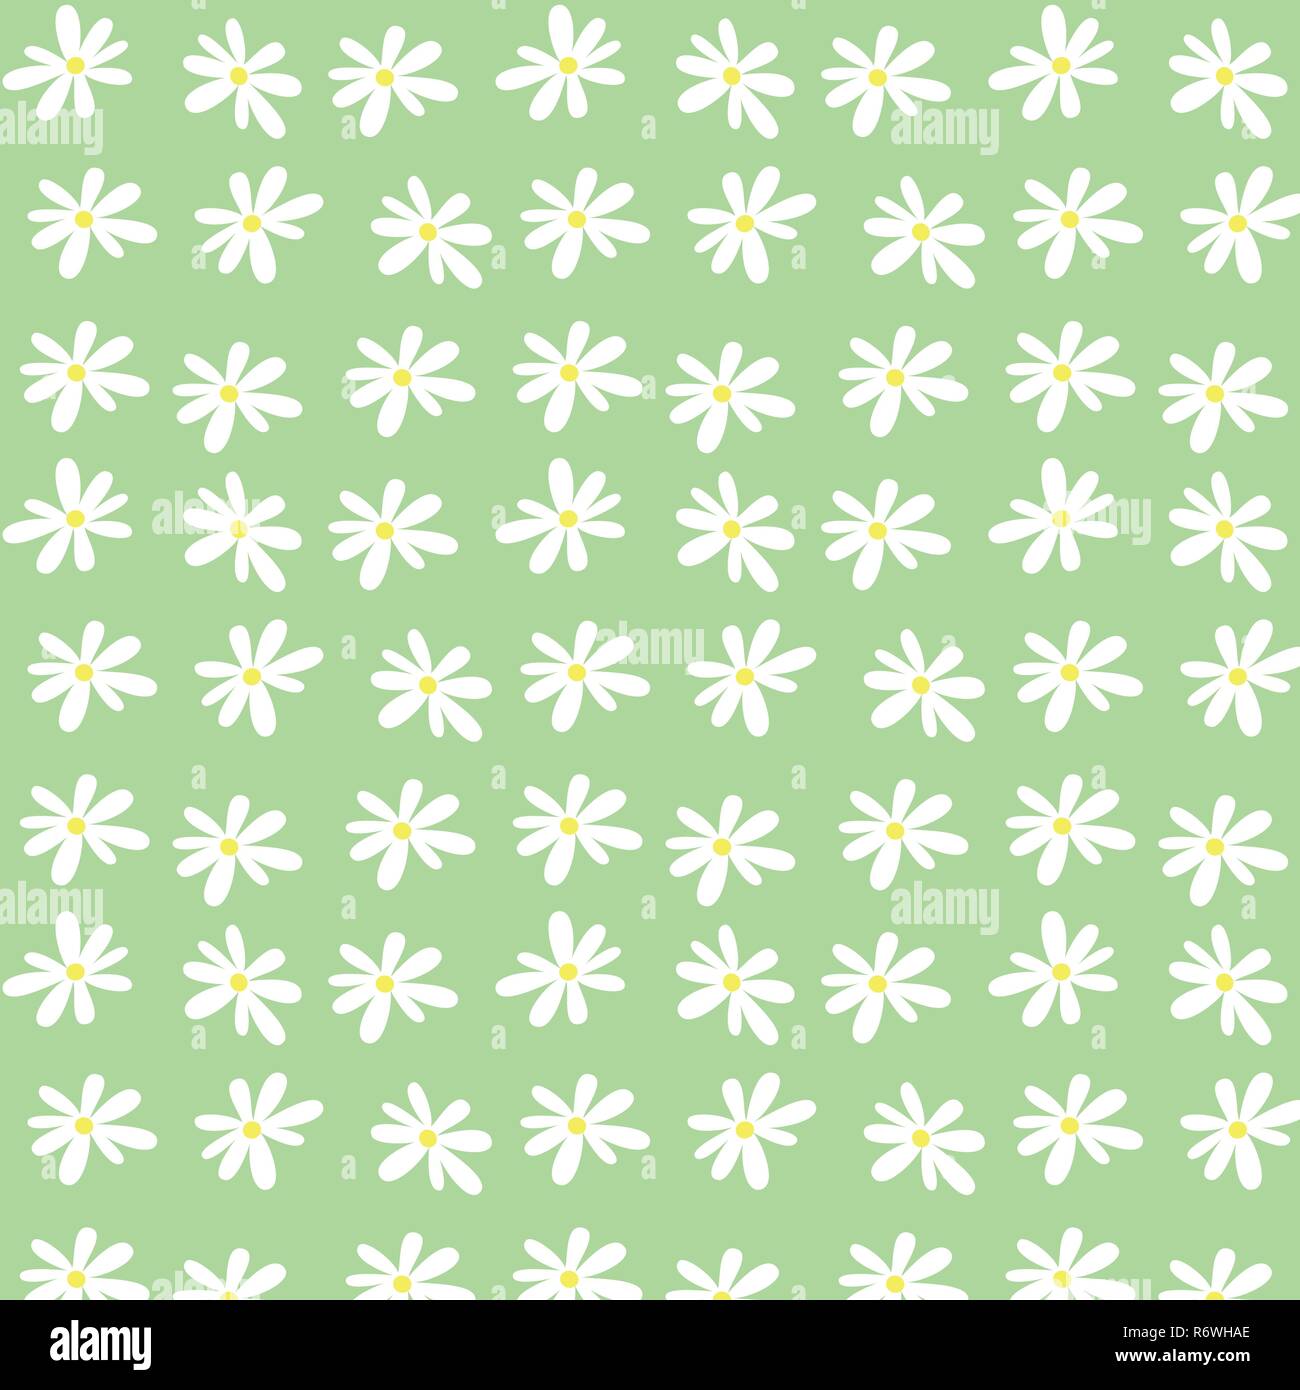 Daisy flowers vector pattern on a light green background Stock Vector